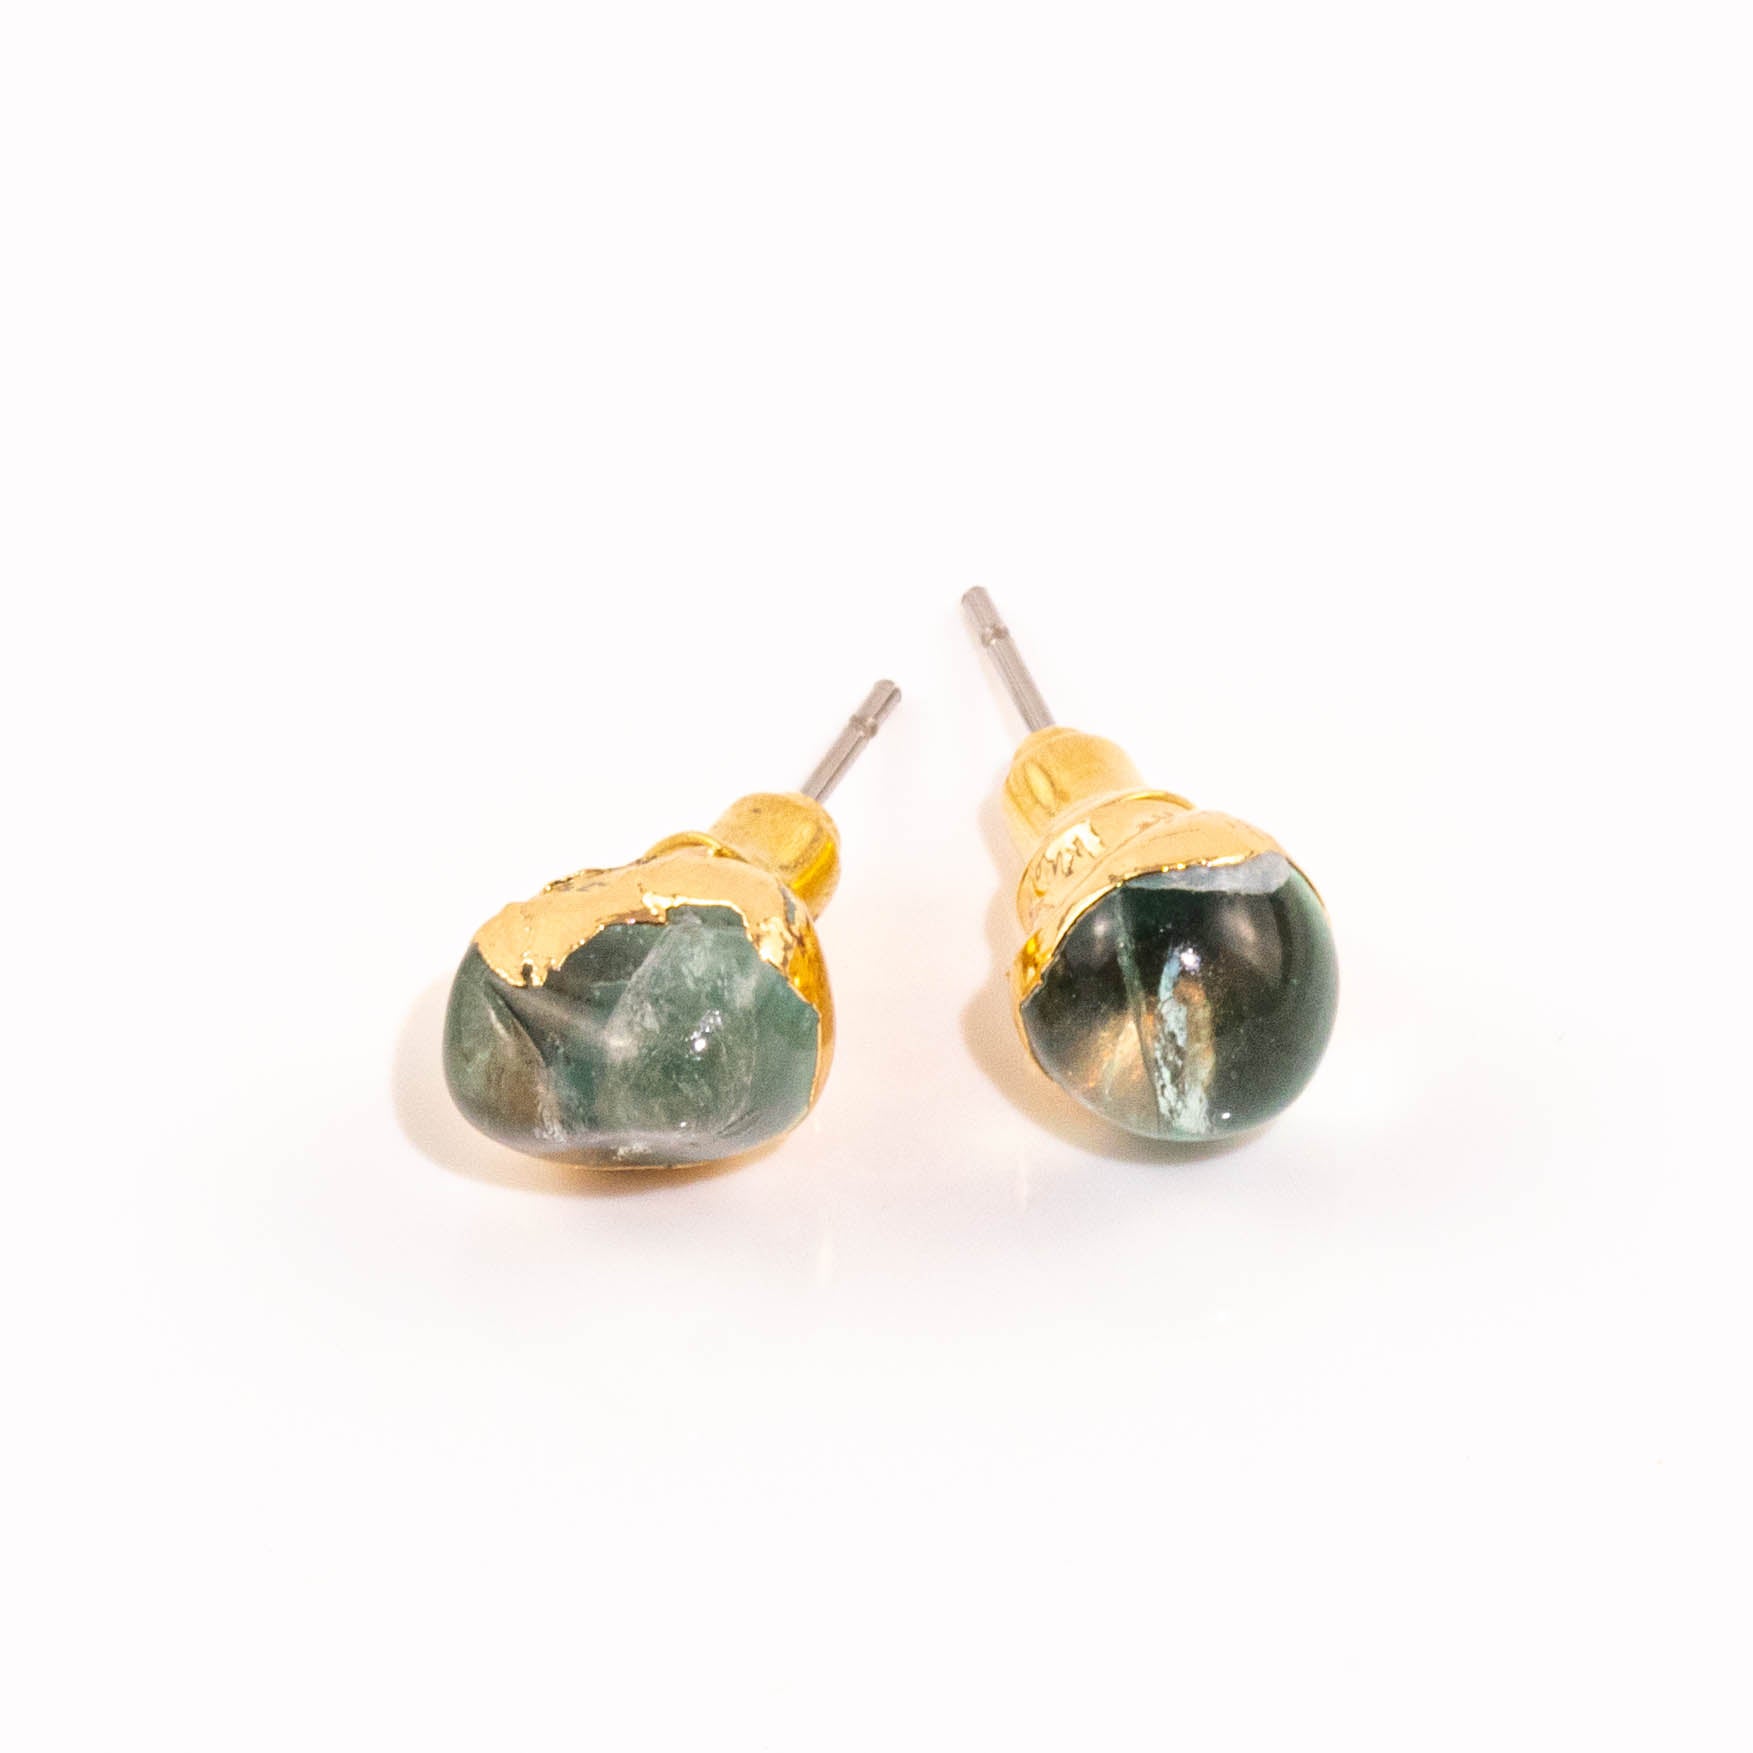 Flourite Earrings in Stainless Steel for Focus & Decision Making